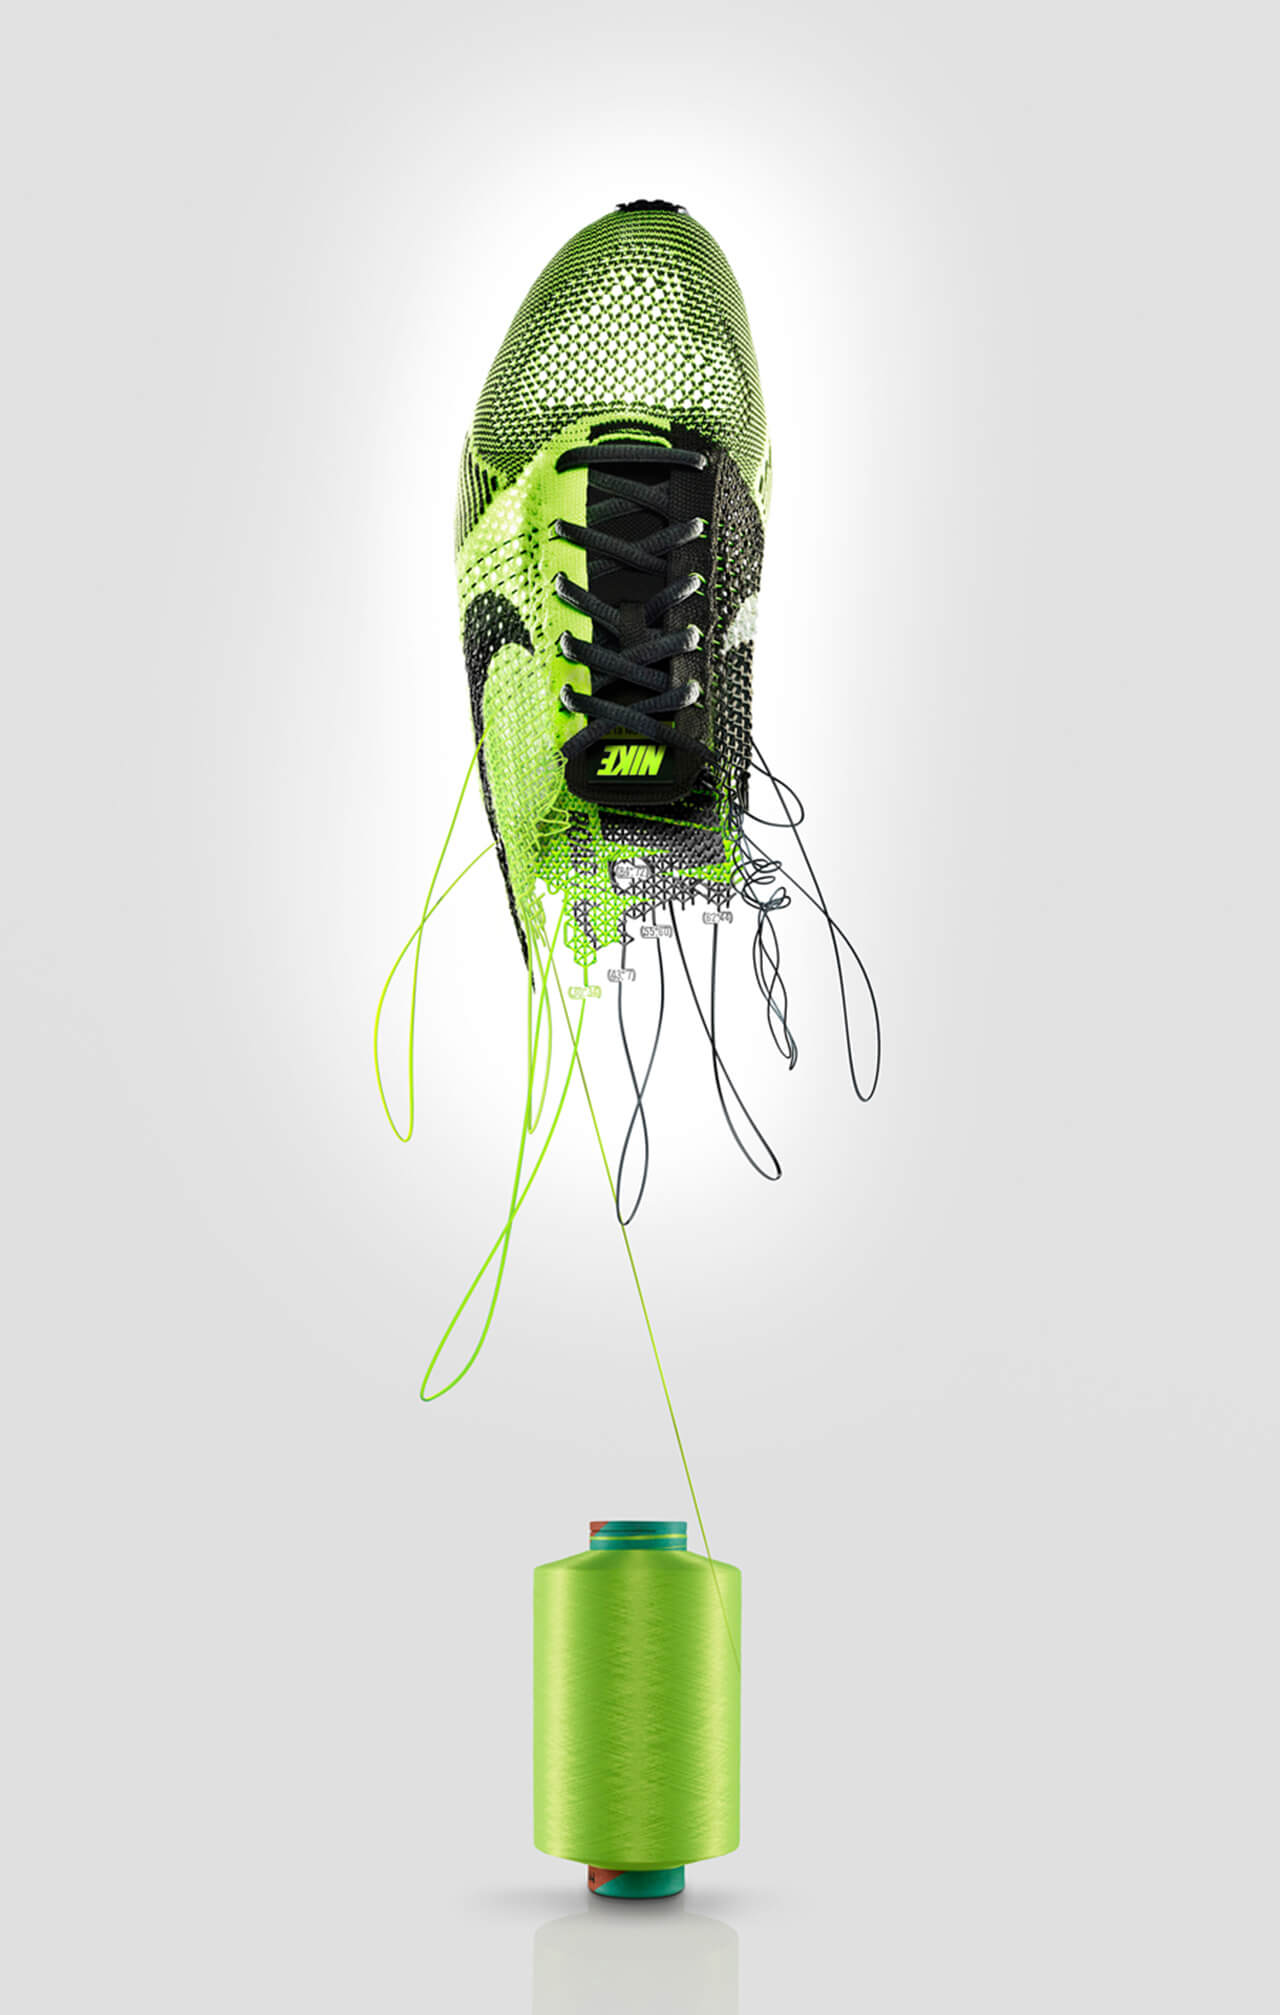 Computer generated image of a green and black sports shoe being untangled from a cotton reel